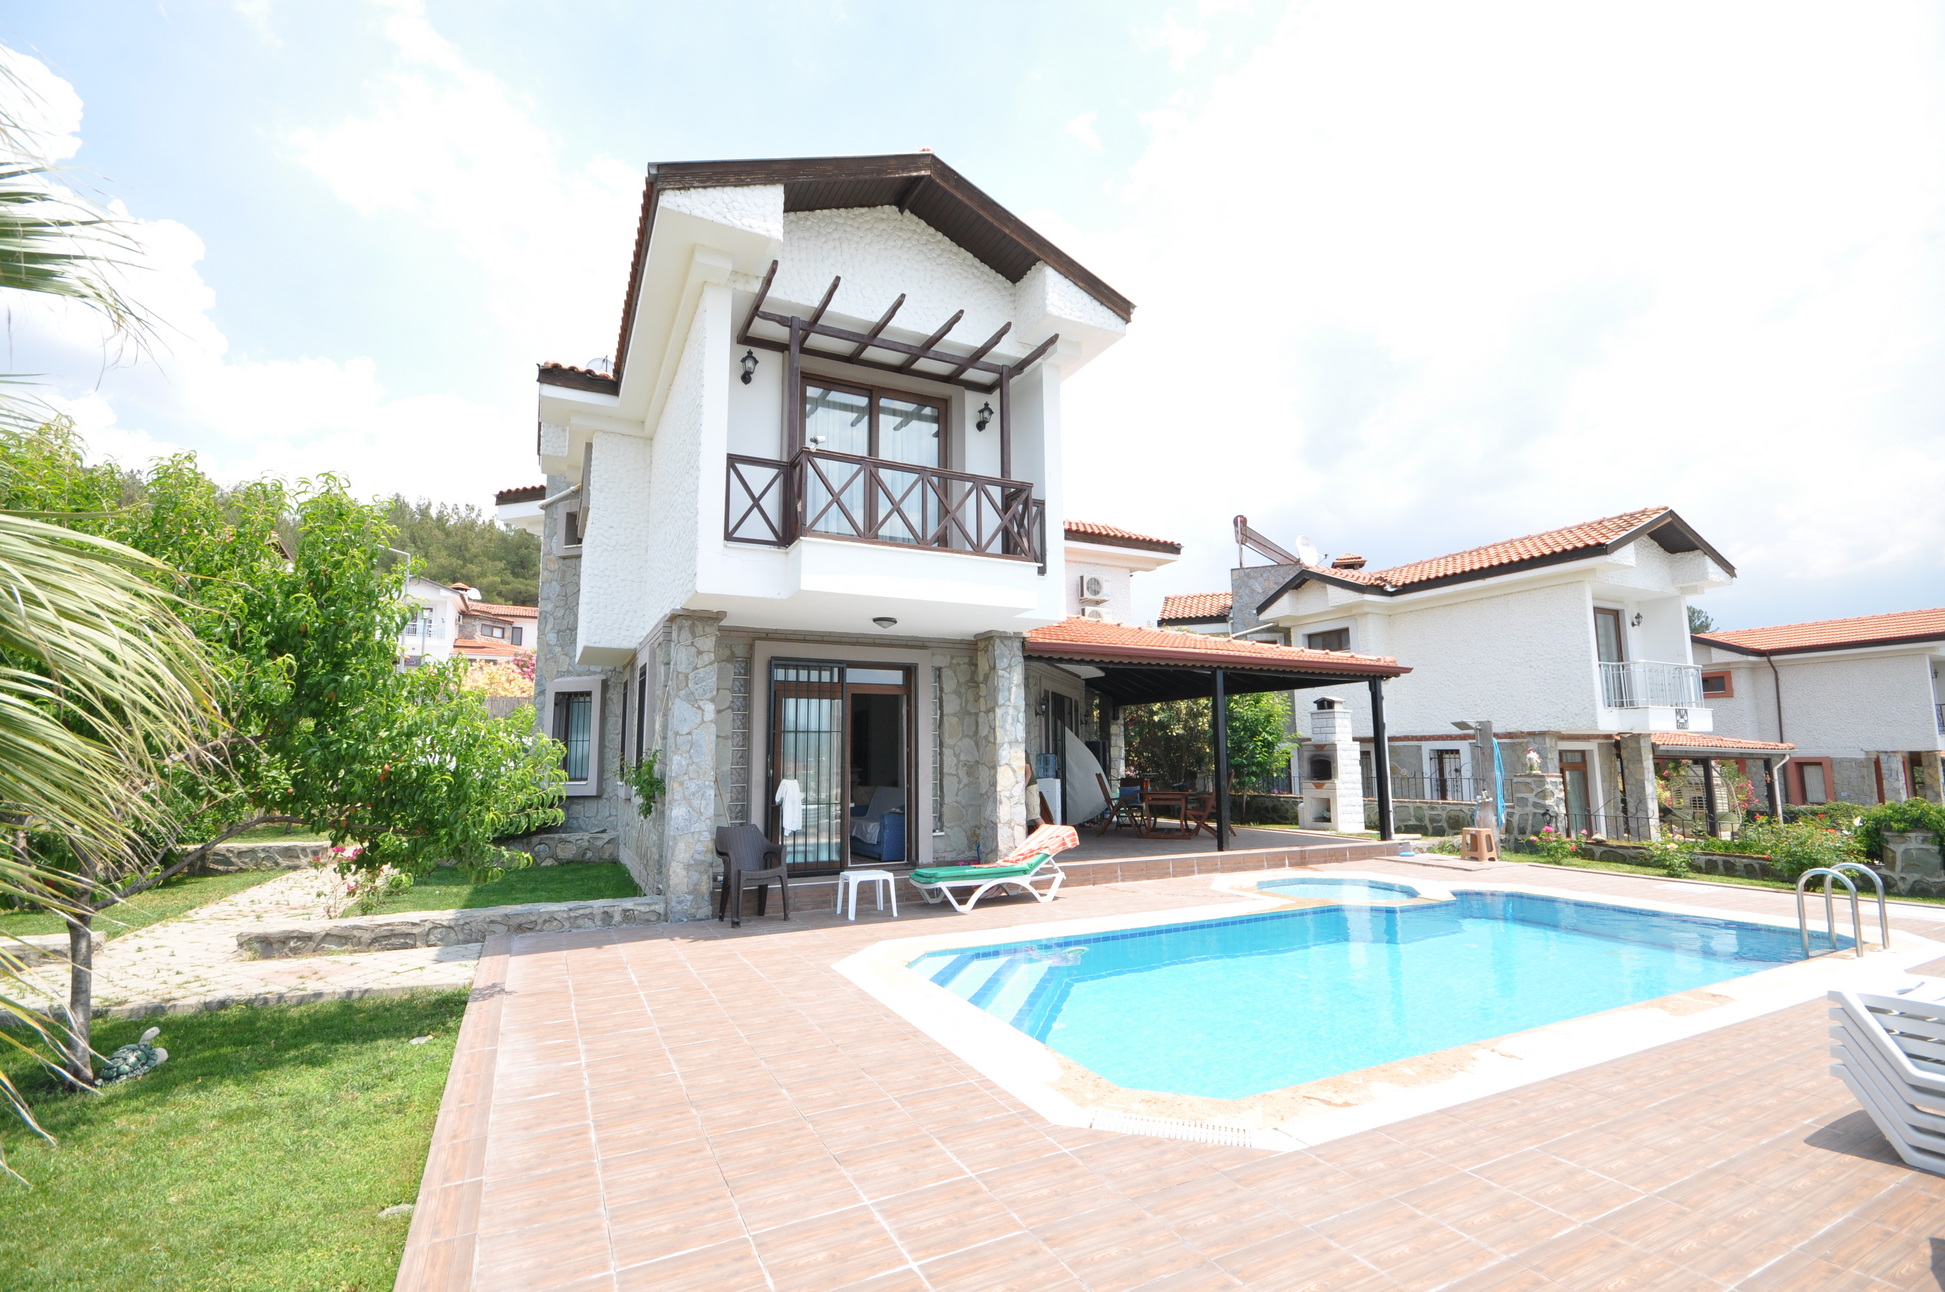 Stunning Traditional Stone 4 Bed Detached Villa with Large Private Garden & Pool